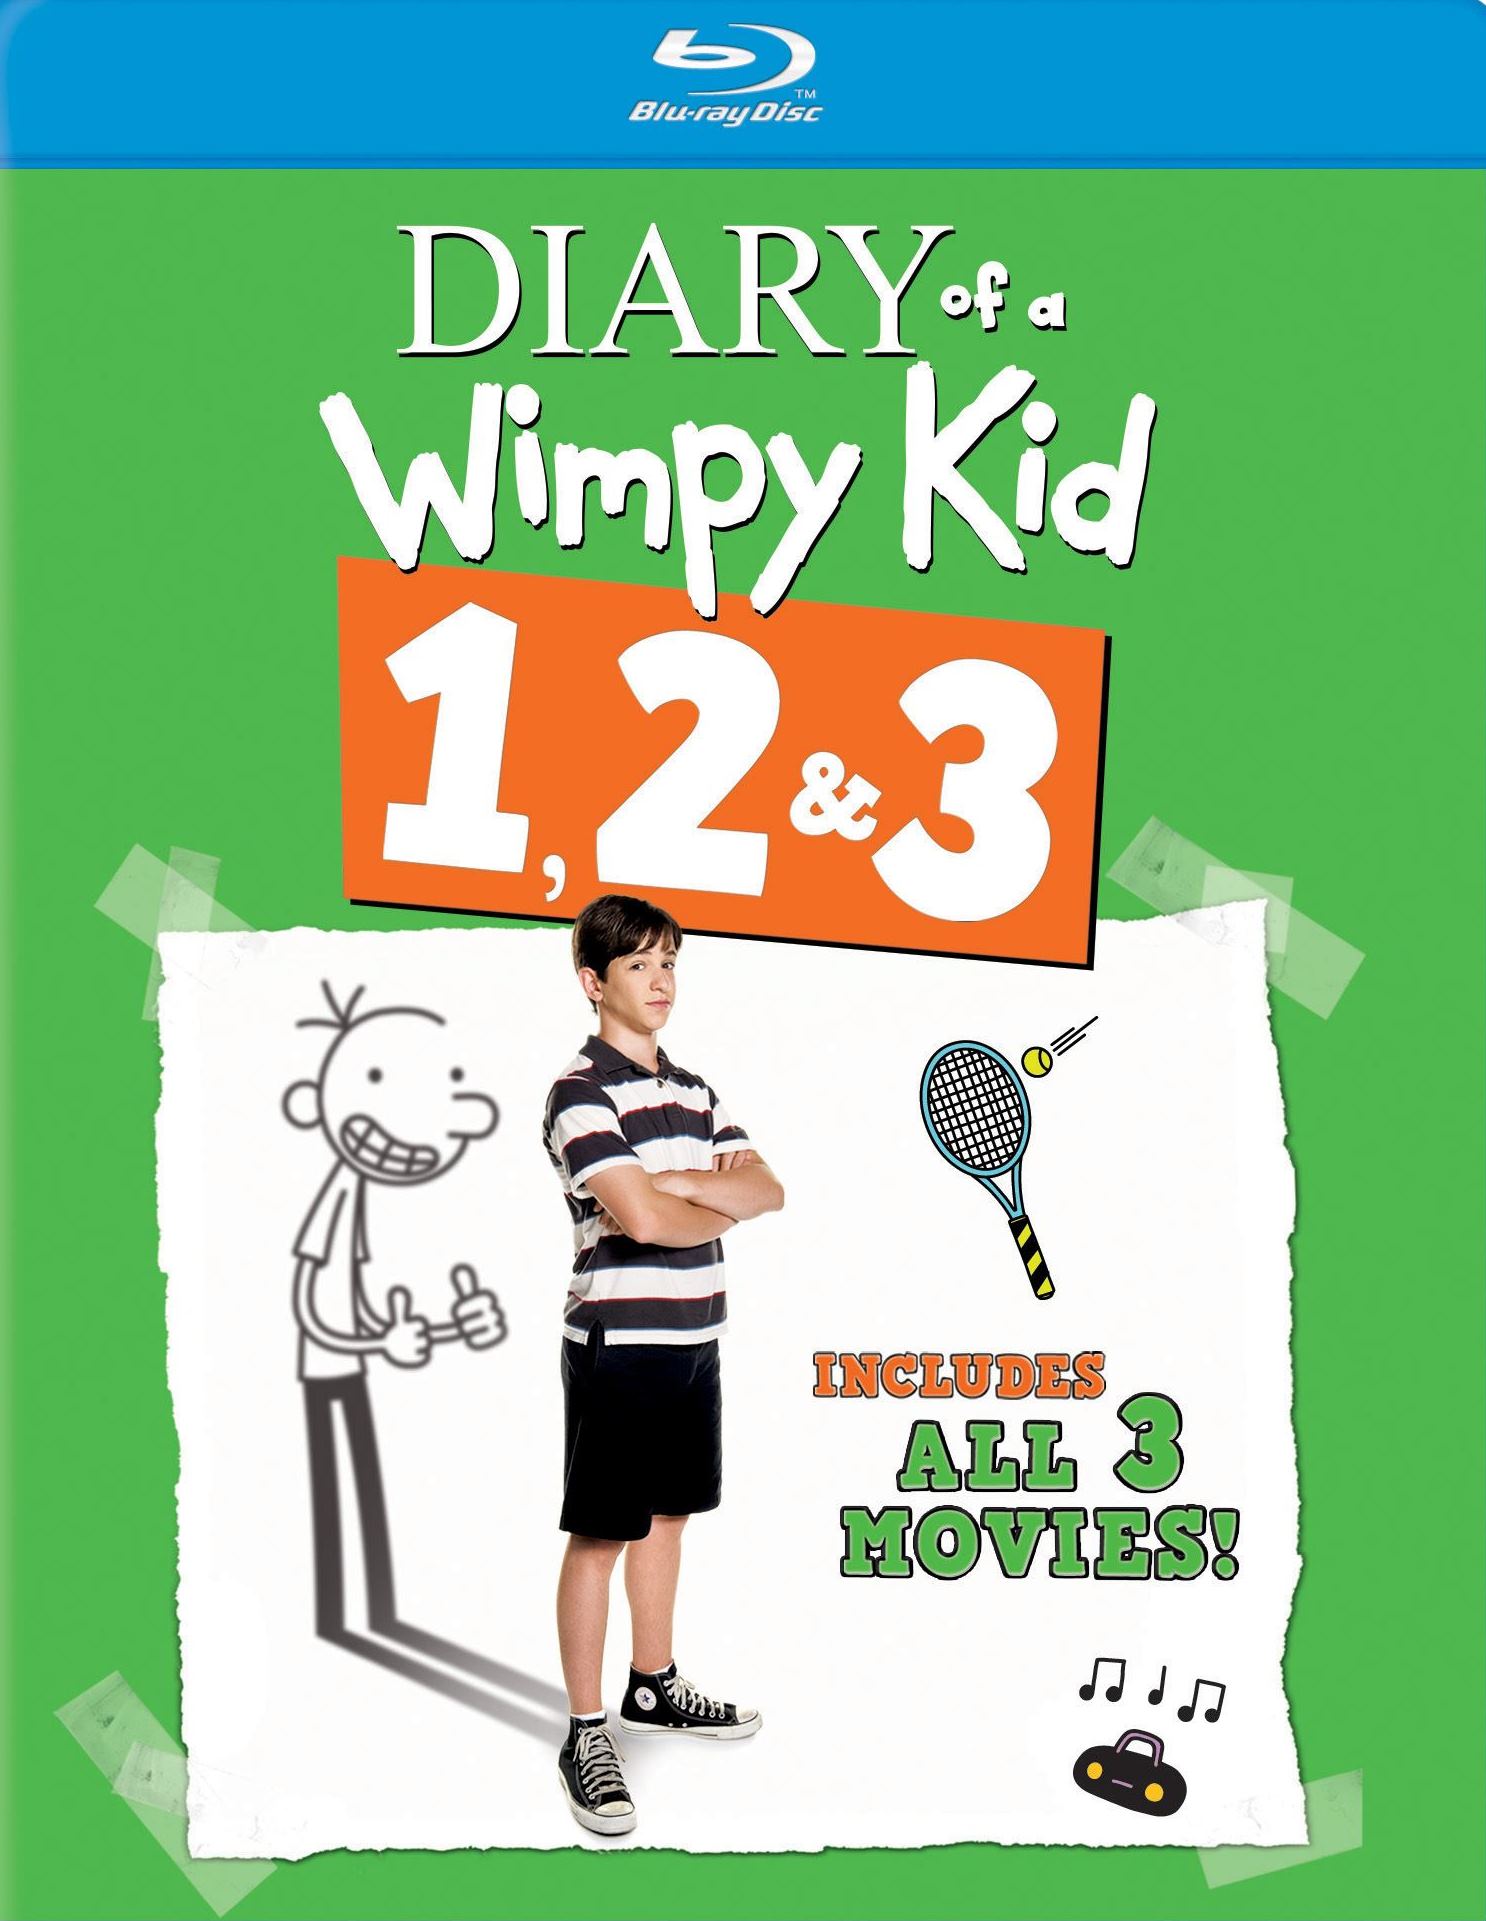 NEW! Diary of a Wimpy Kid Box Set Collection 1-23 Books by Jeff Kinney